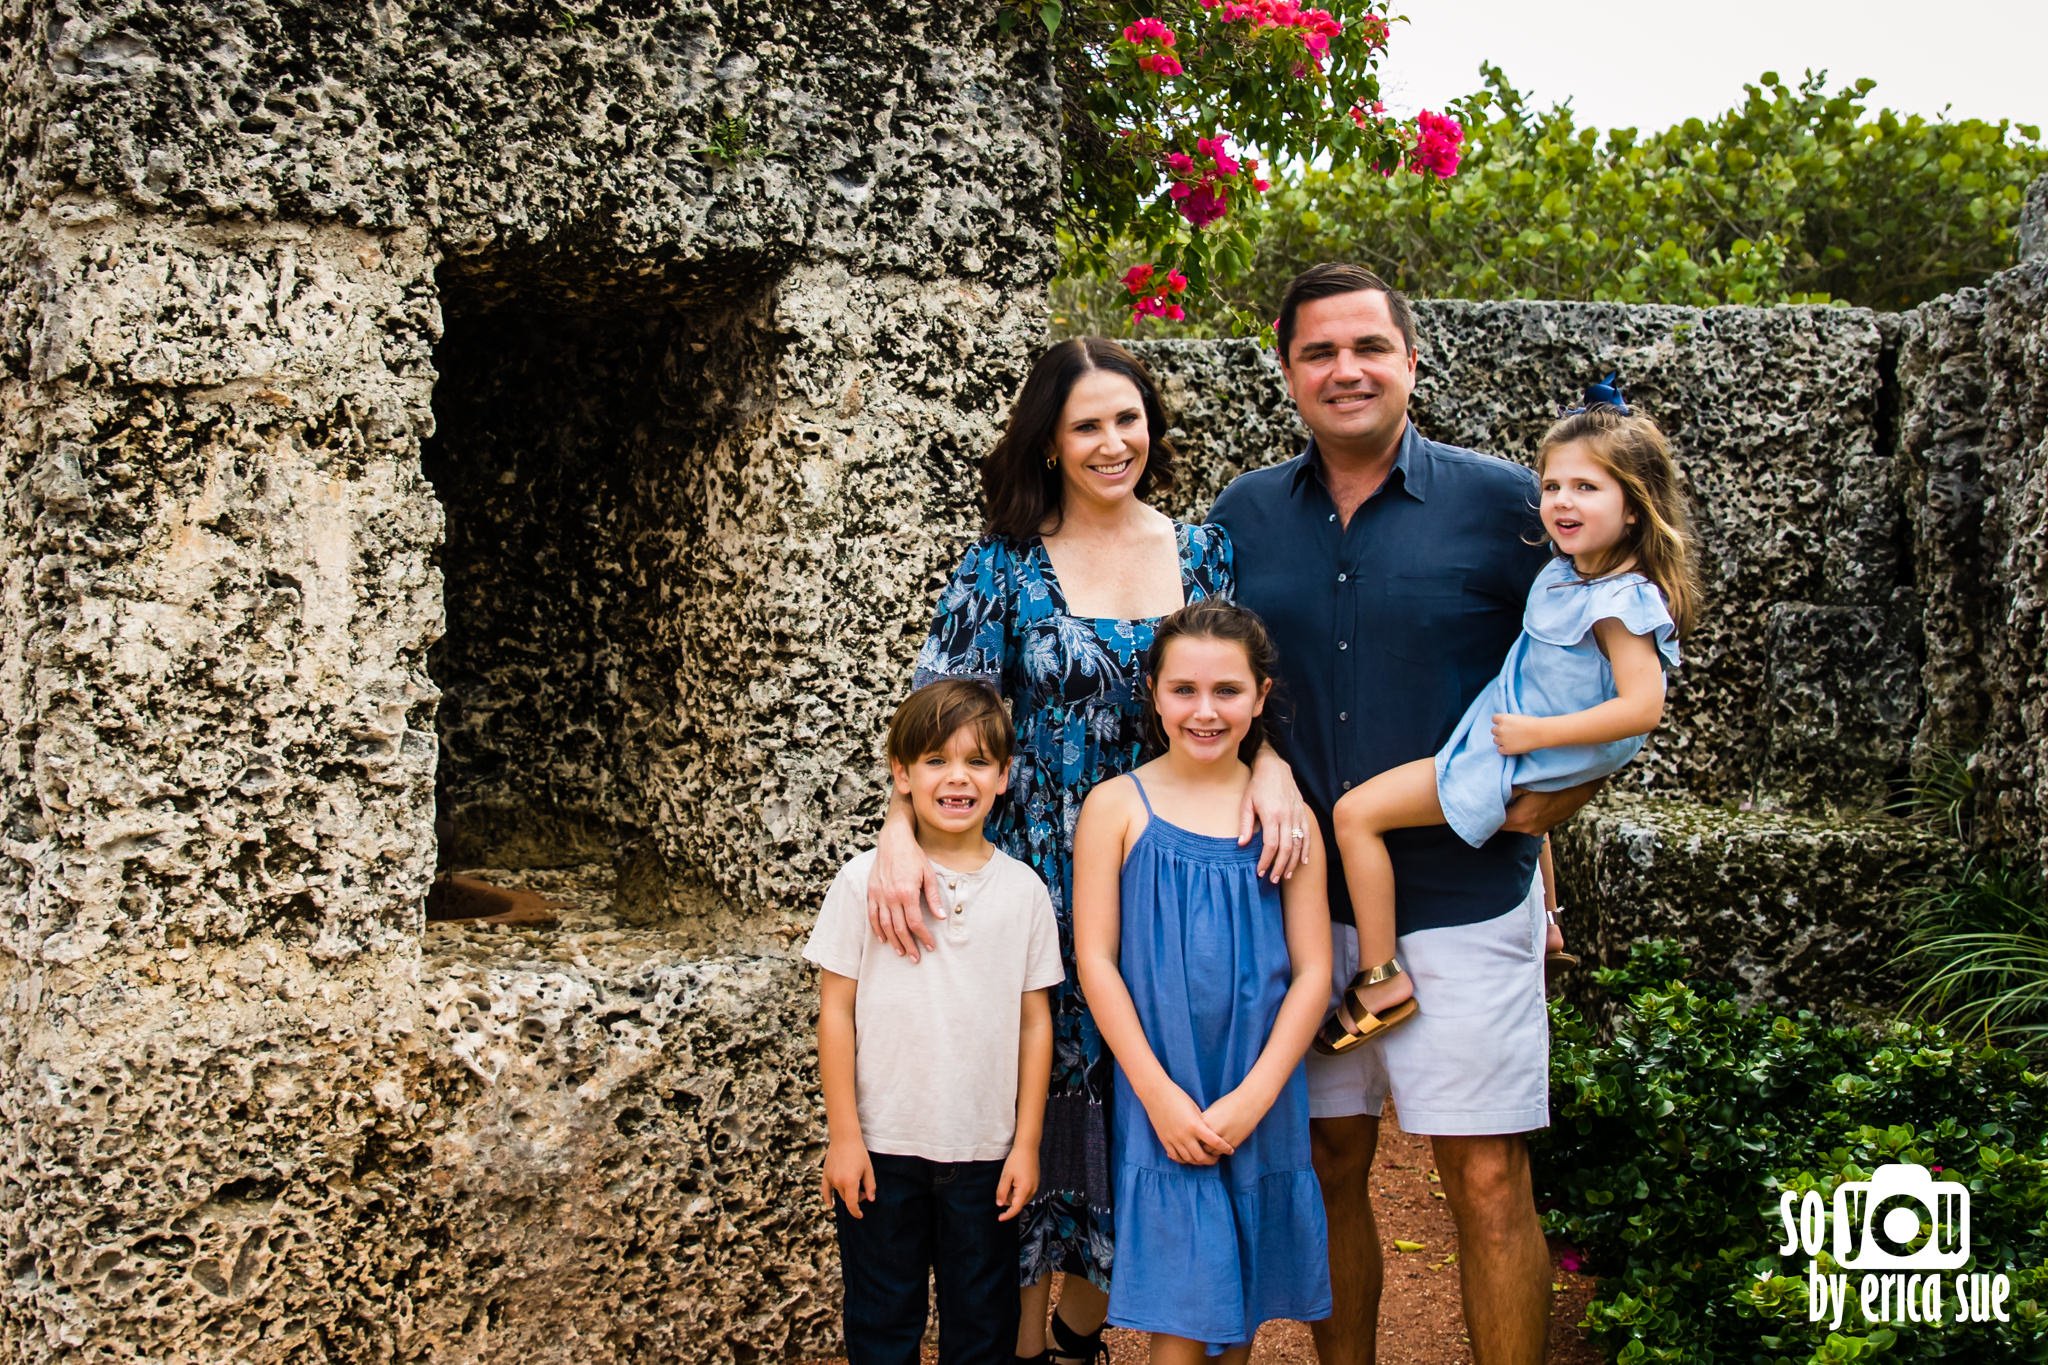 3-lifestyle-family-photographer-coral-castle-miami-fl-so-you-by-erica-sue-ES2_8801.jpg